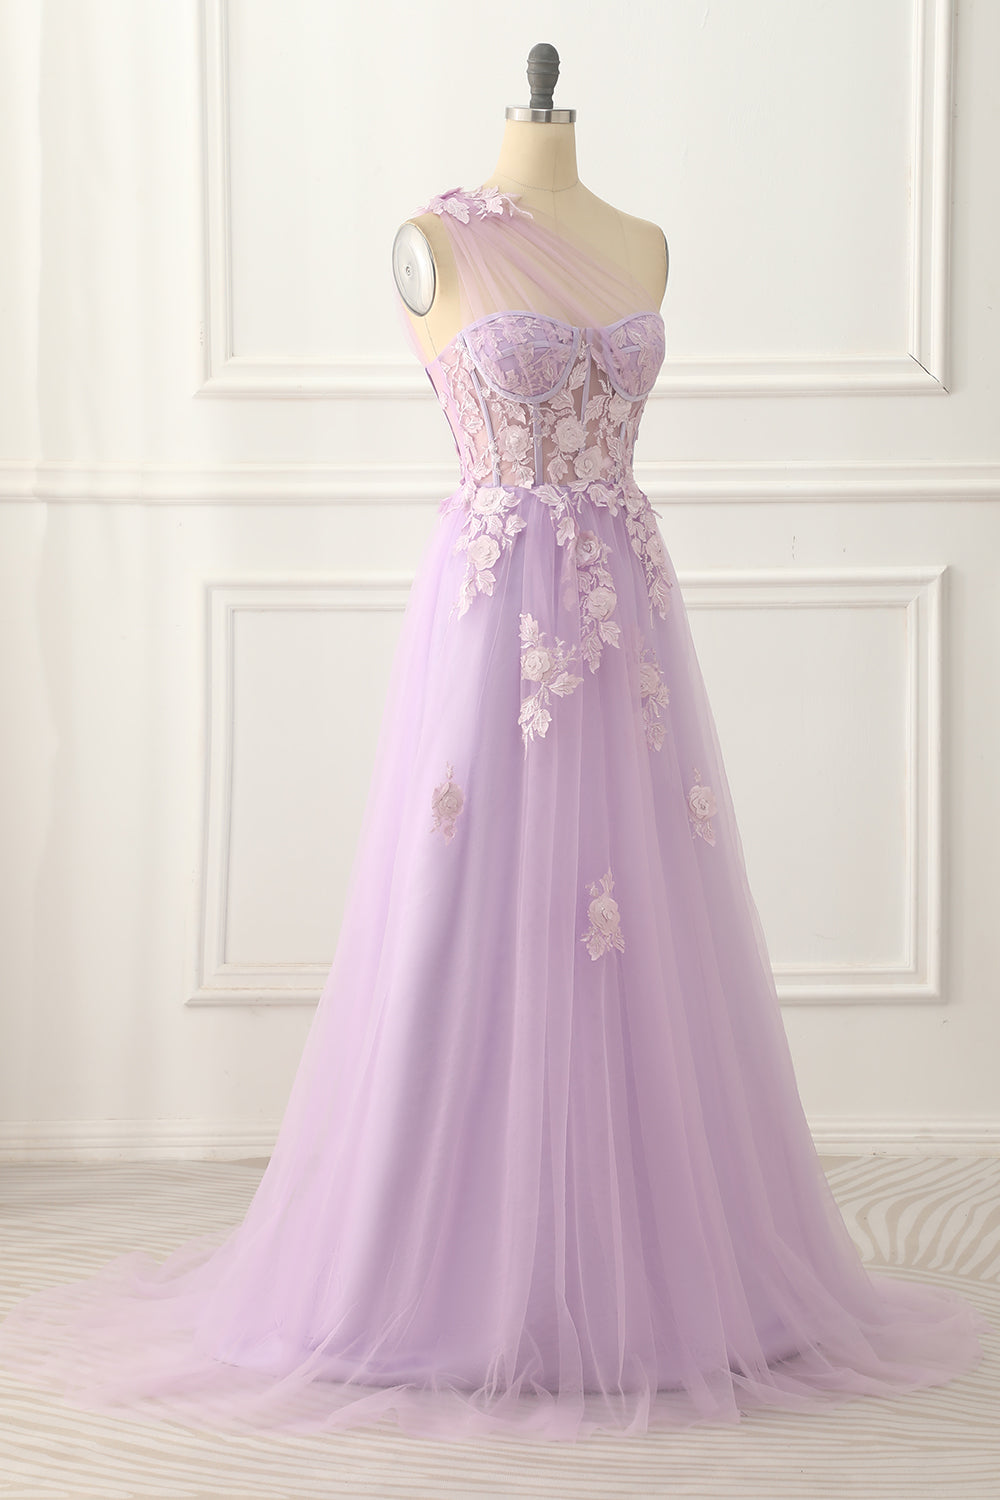 Bridesmaid Dresses Sleeveless, One Shoulder A-line Tulle Lavender Prom Dress with Appliques